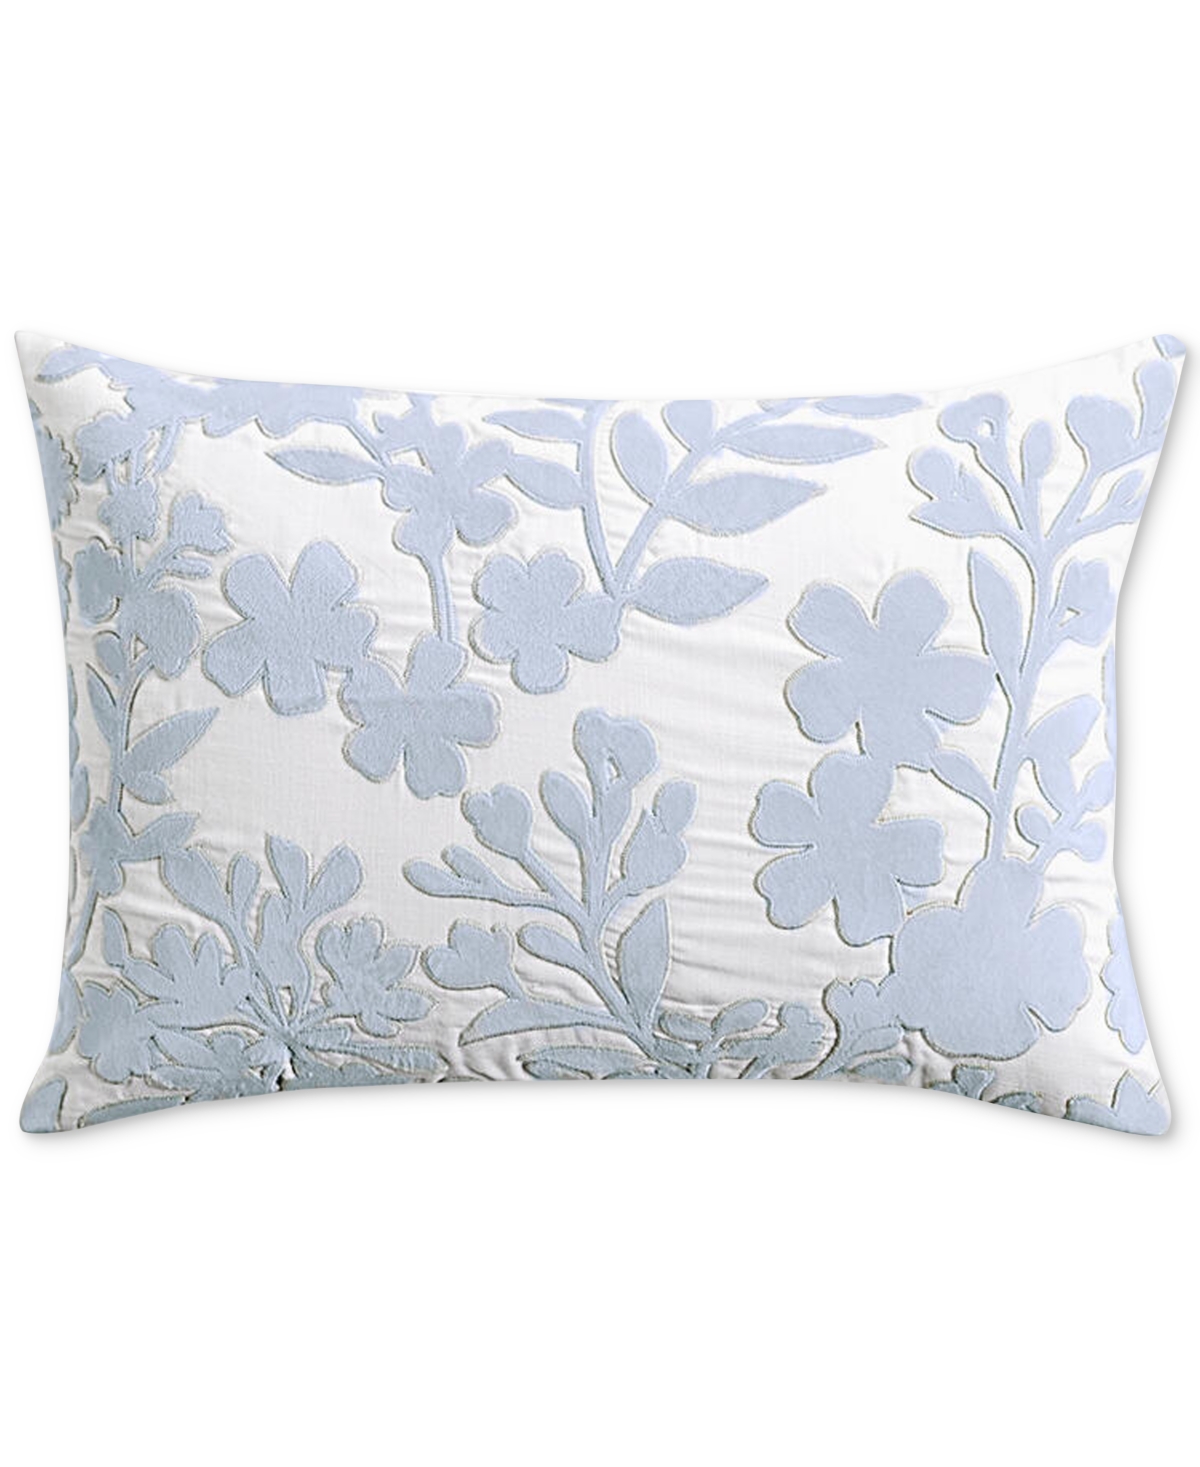 Charter Club Damask Designs Floral Silhouette Velvet Applique Decorative Pillow, 14" X 20", Created For Macy's In Blue Floral